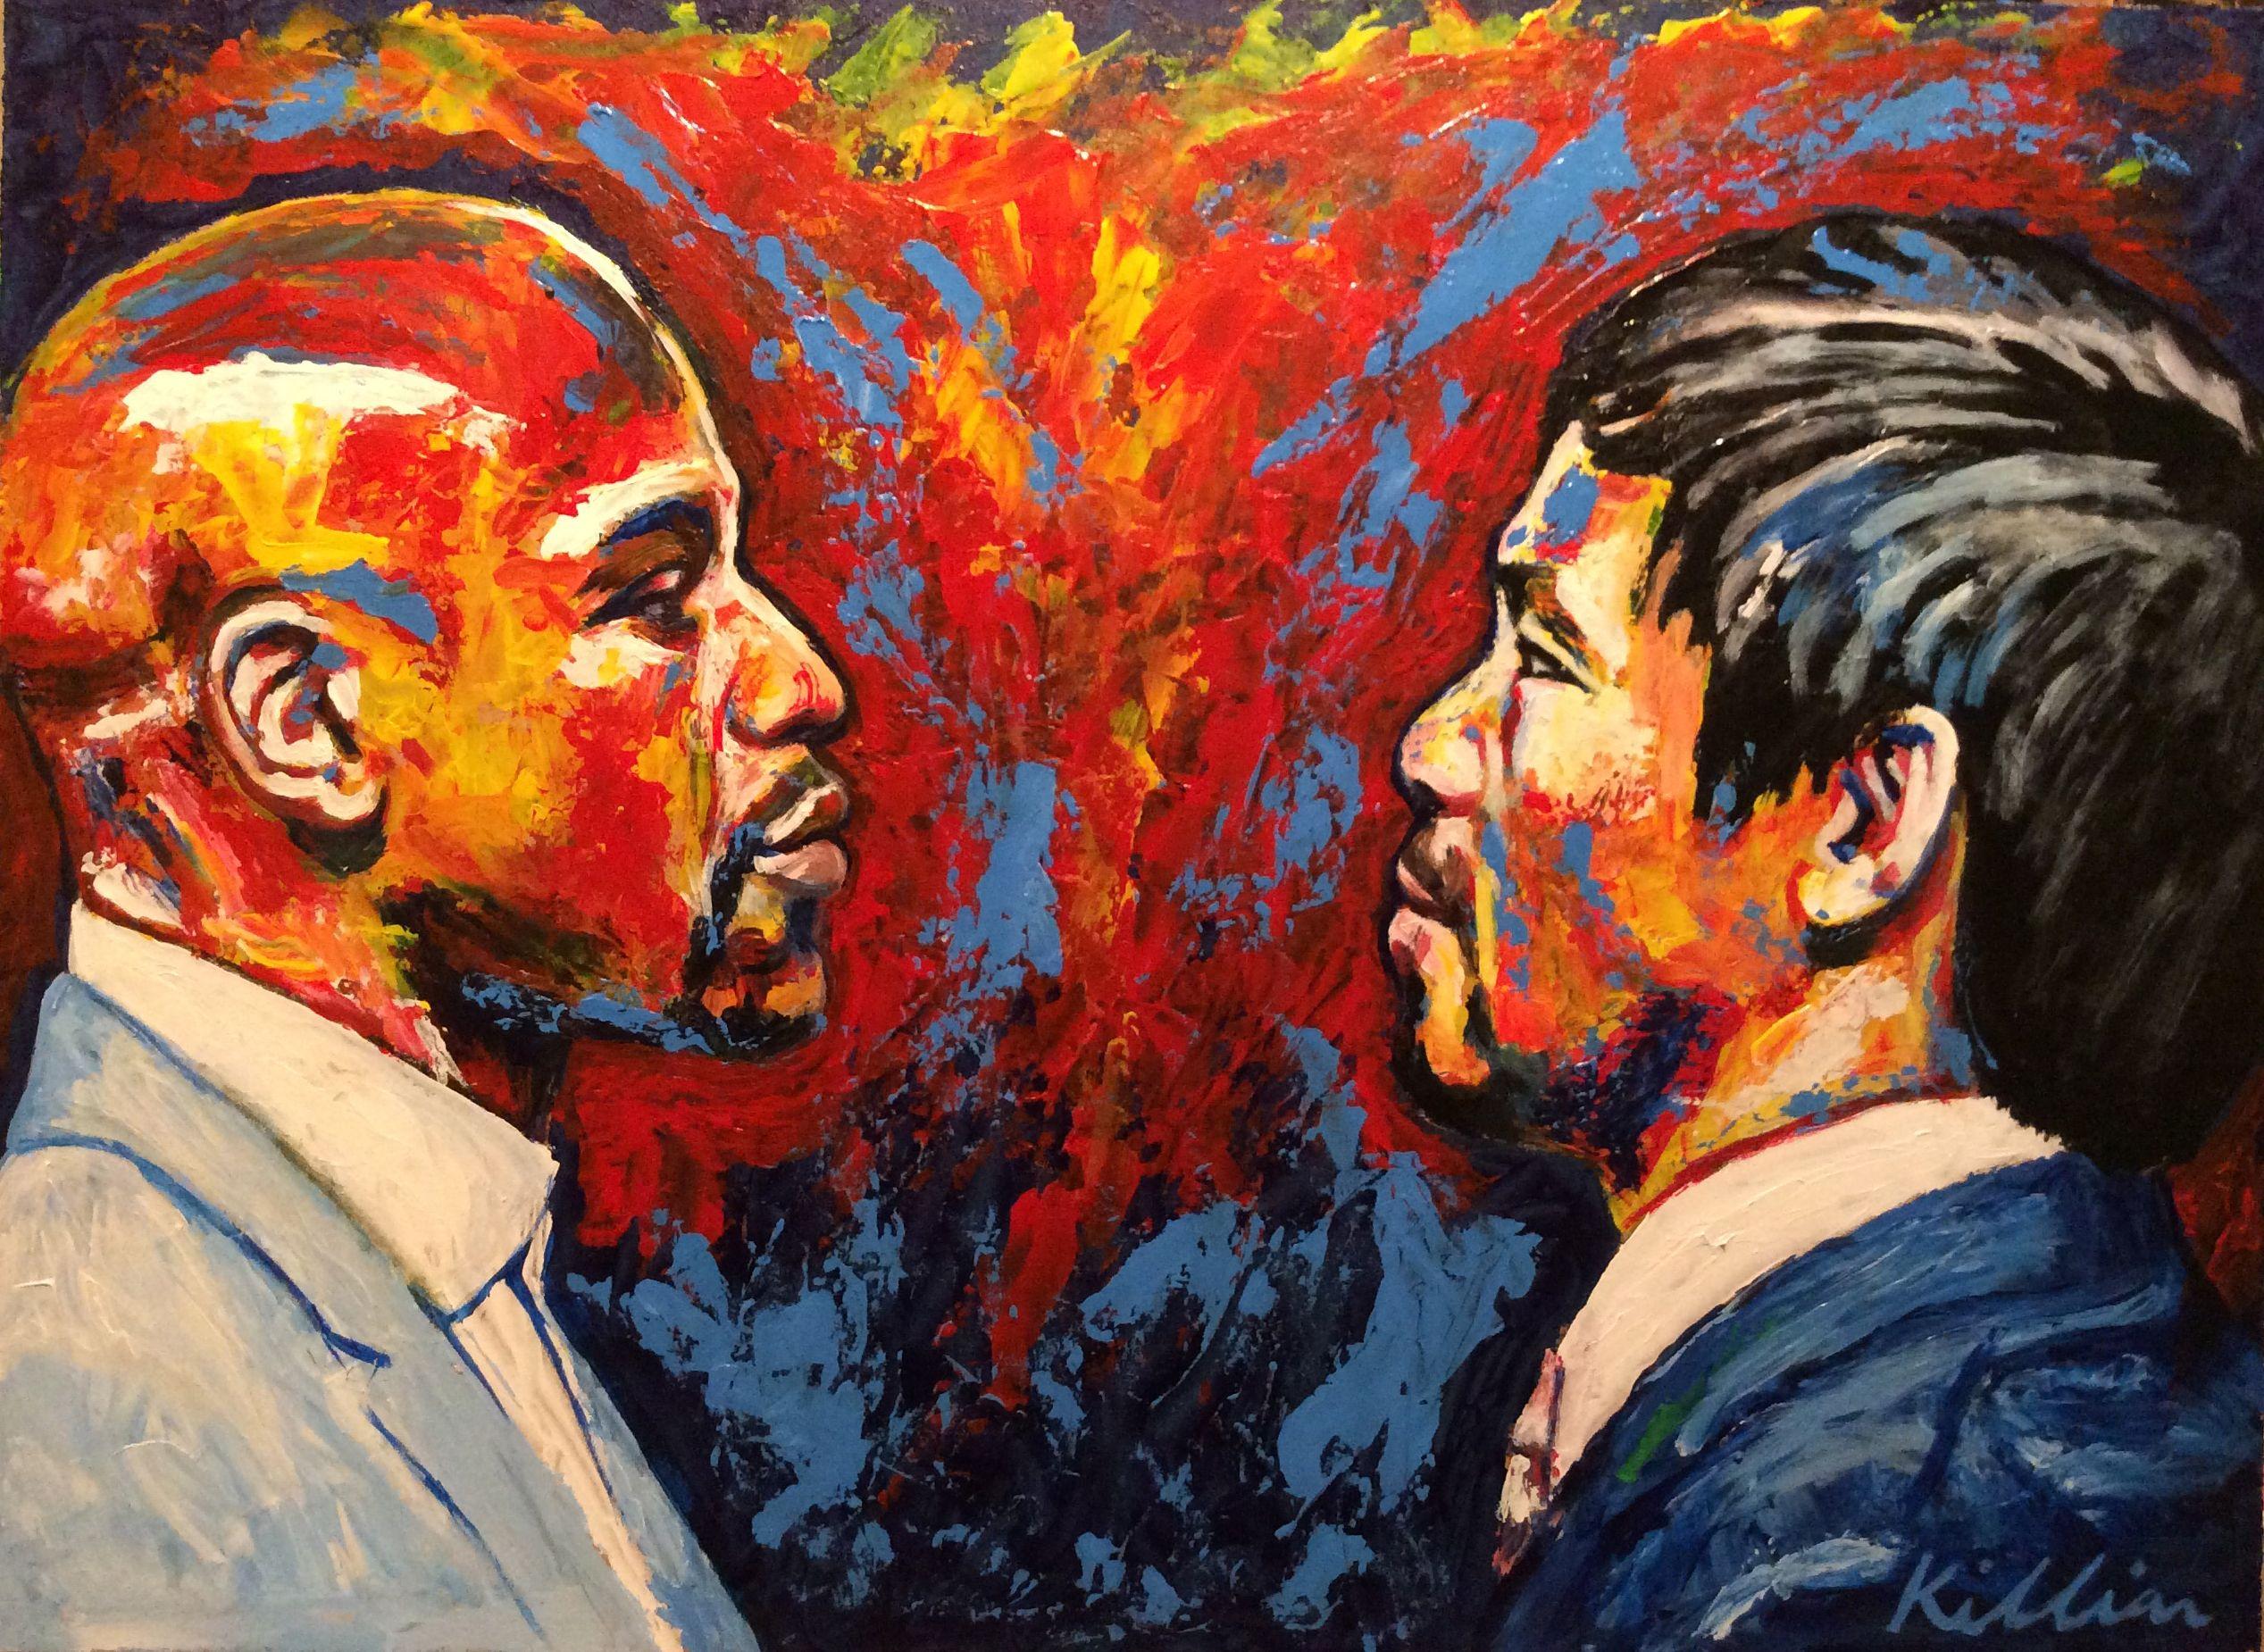 A lifetime burning: A Floyd Mayweather Jr.-Manny Pacquiao preview